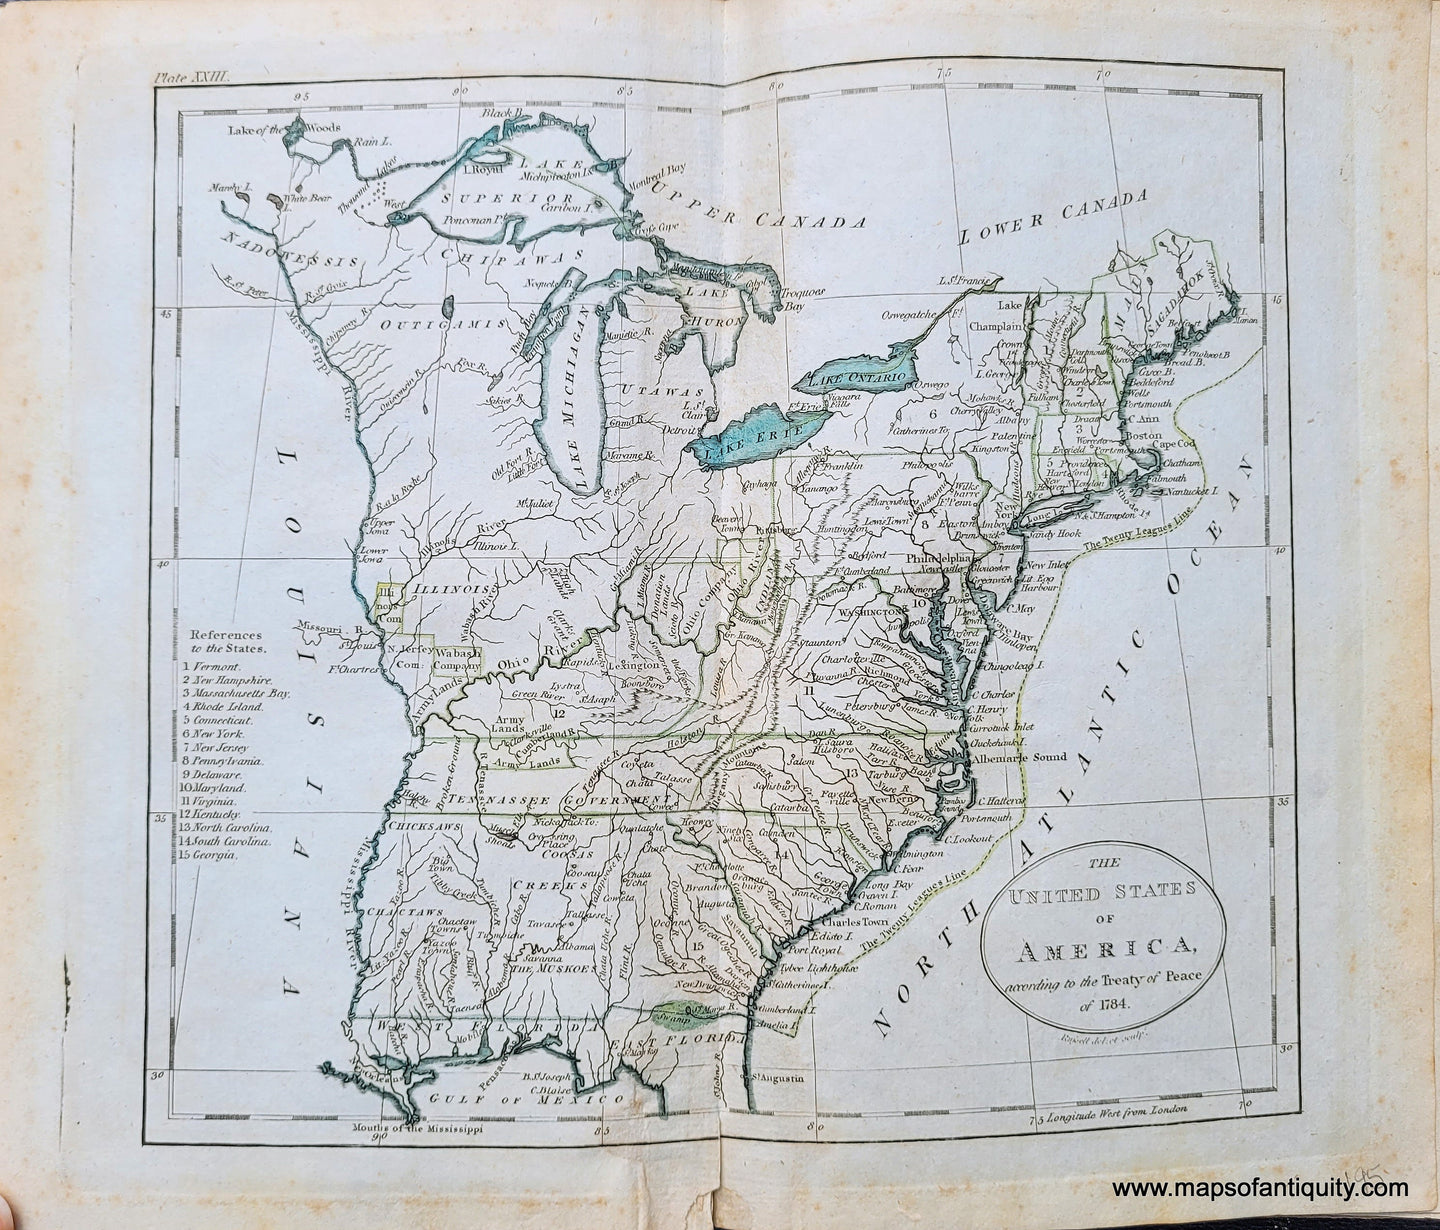 Genuine-Antique-Map-The-United-States-of-America-according-to-the-Treaty-of-Peace-of-1784-1800-Russell-Guthrie-Maps-Of-Antiquity